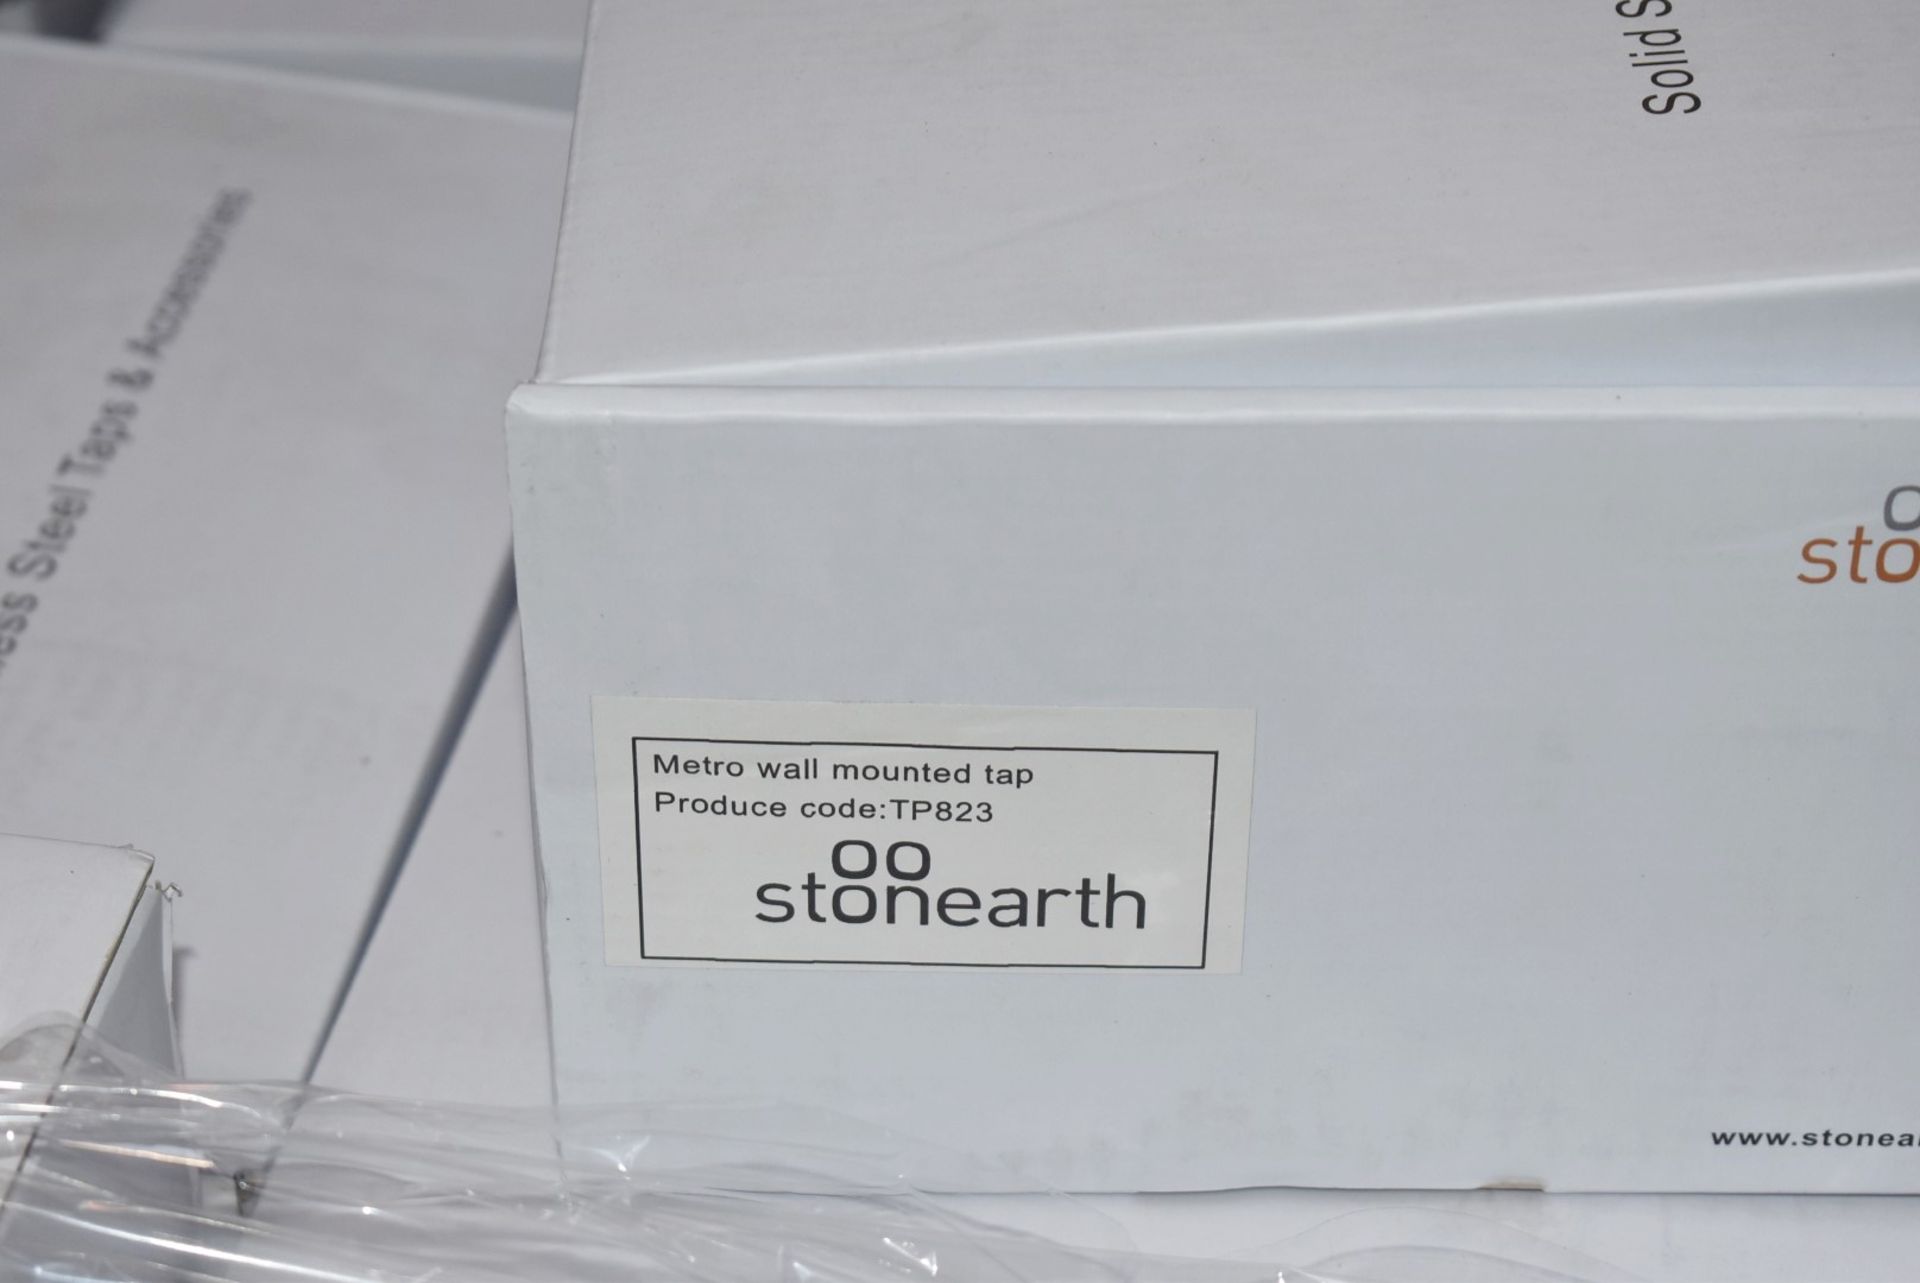 1 x Stonearth 'Metro' Stainless Steel Wall Mounted Tap - Brand New & Boxed - RRP £345 - Ref: TP823 - Image 7 of 9